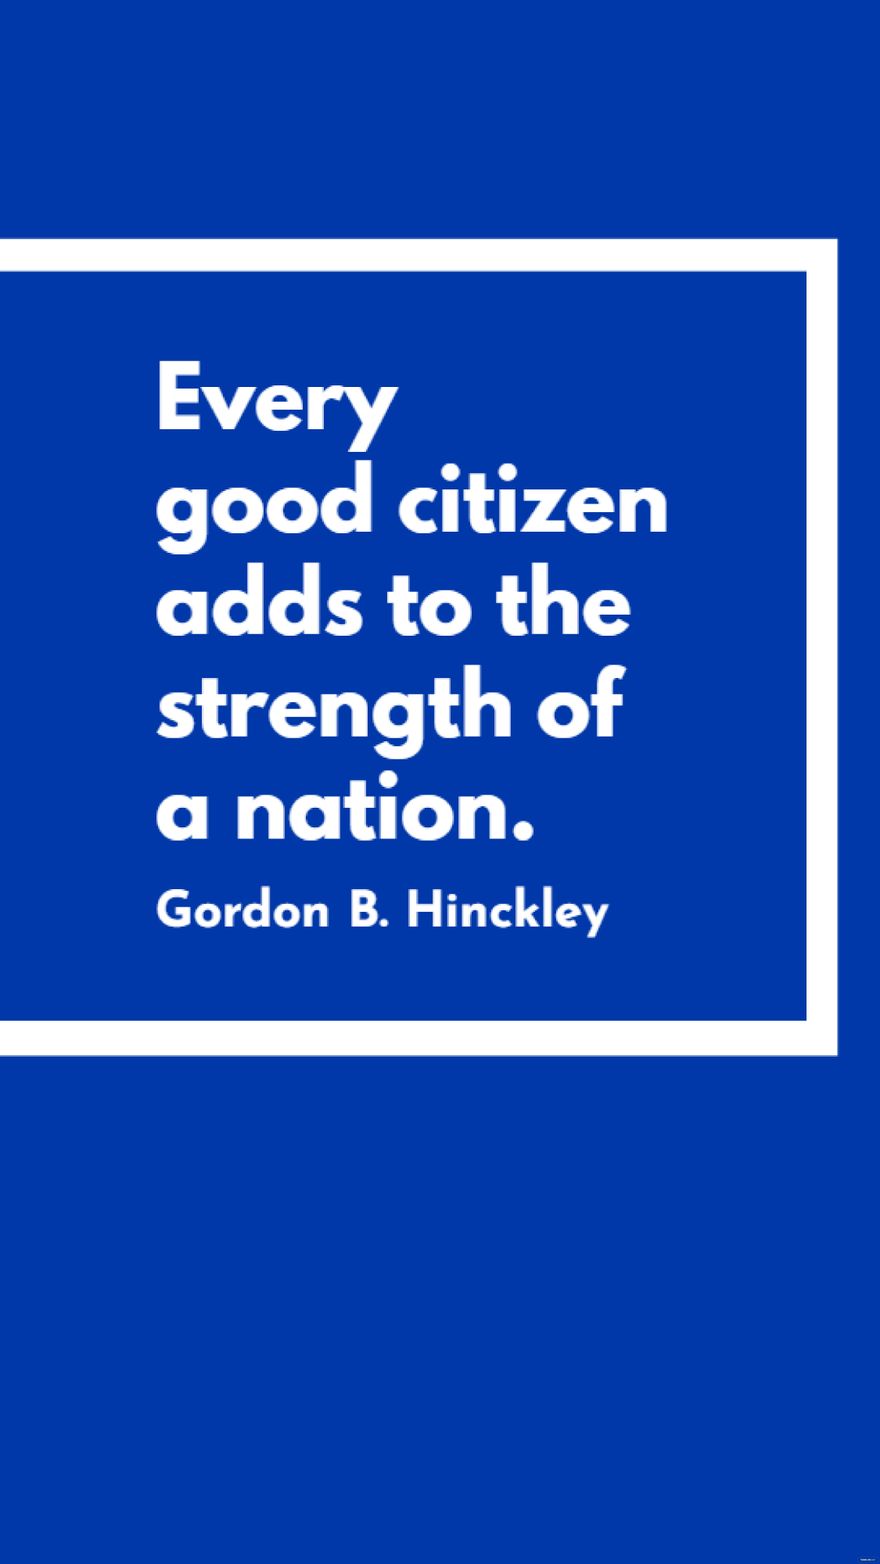 Gordon B. Hinckley - Every good citizen adds to the strength of a nation.